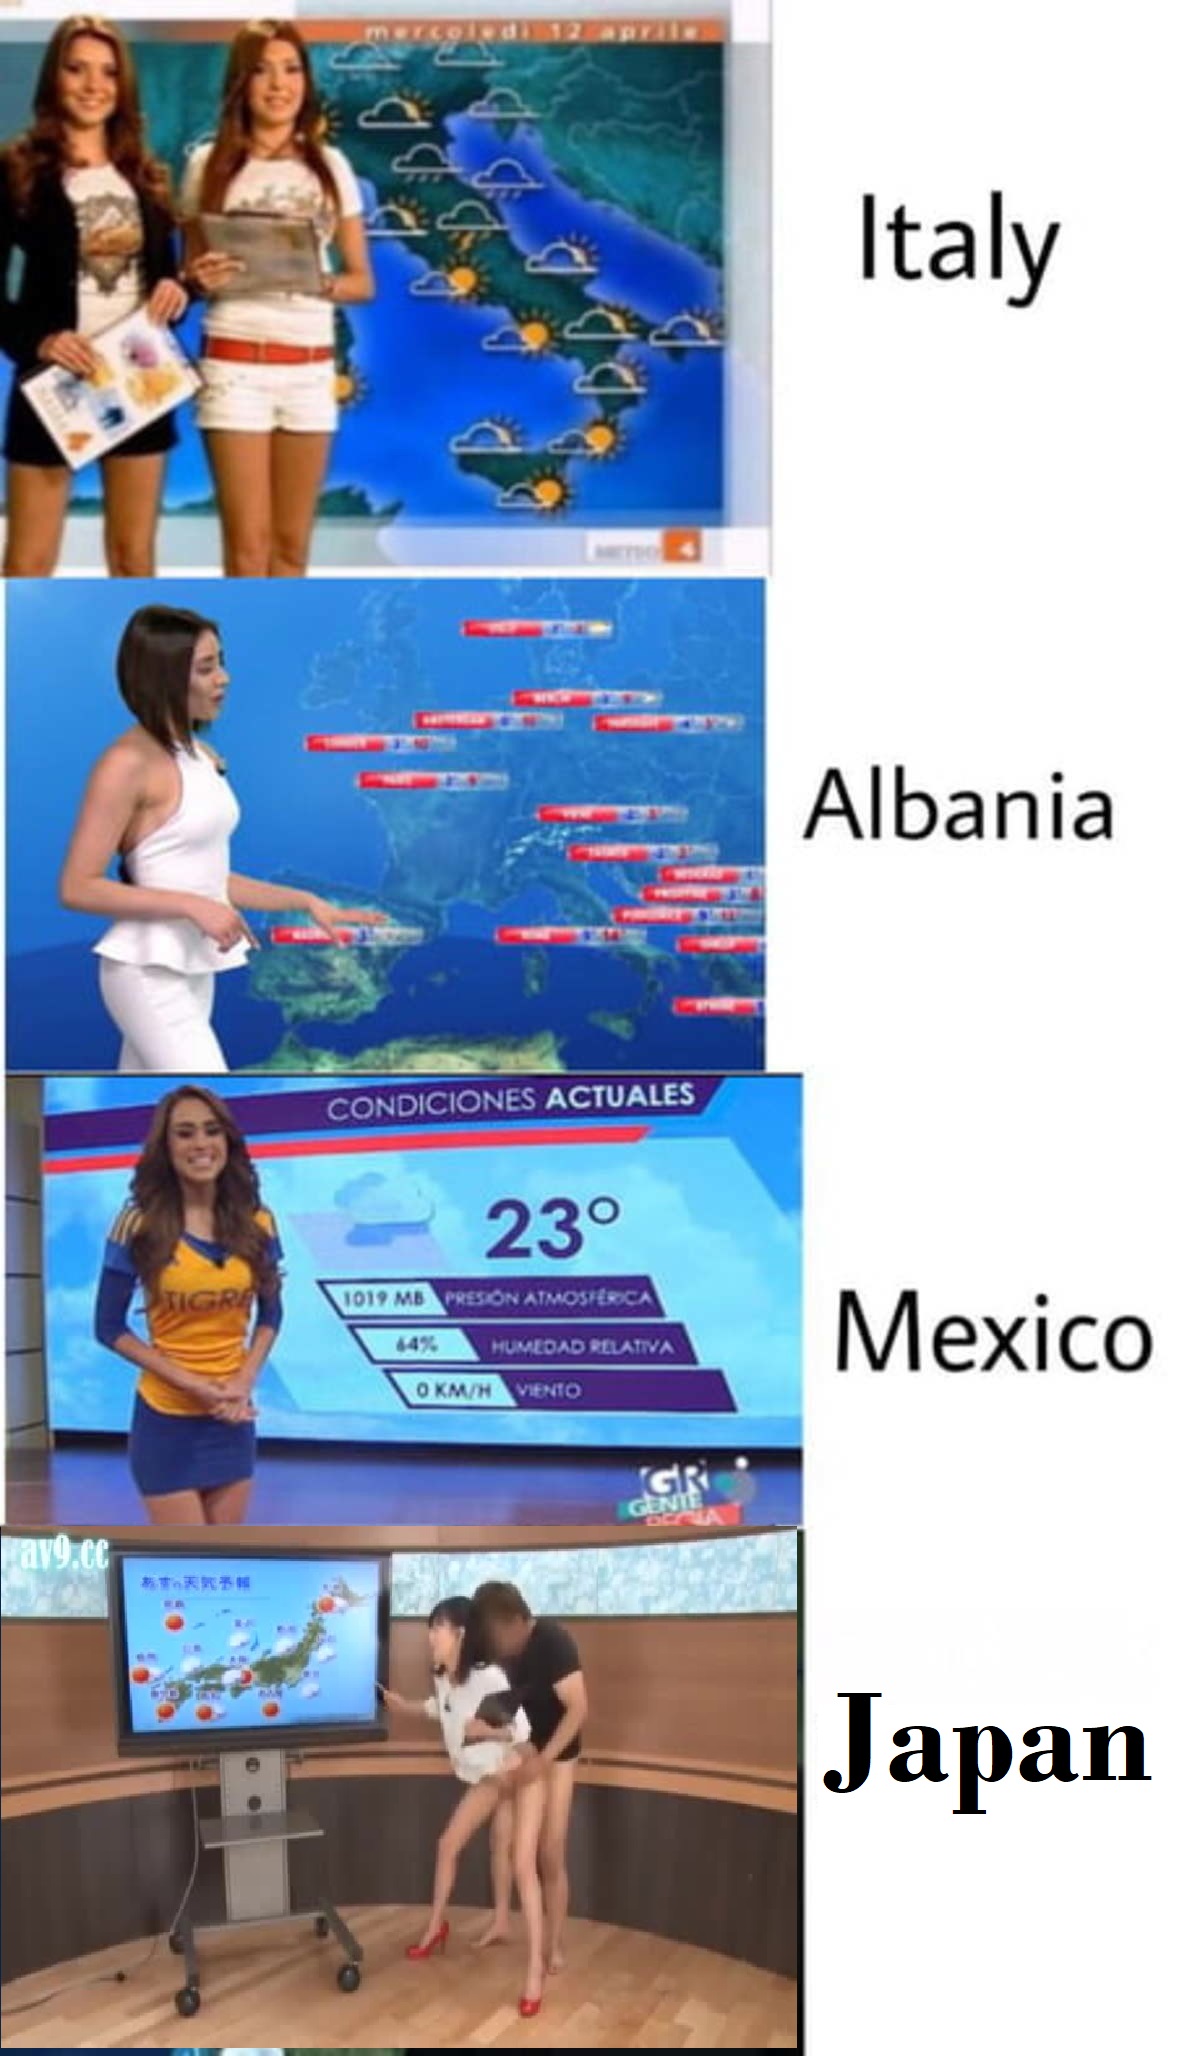 Weather News Across Different Countries Photo on Porn imgur